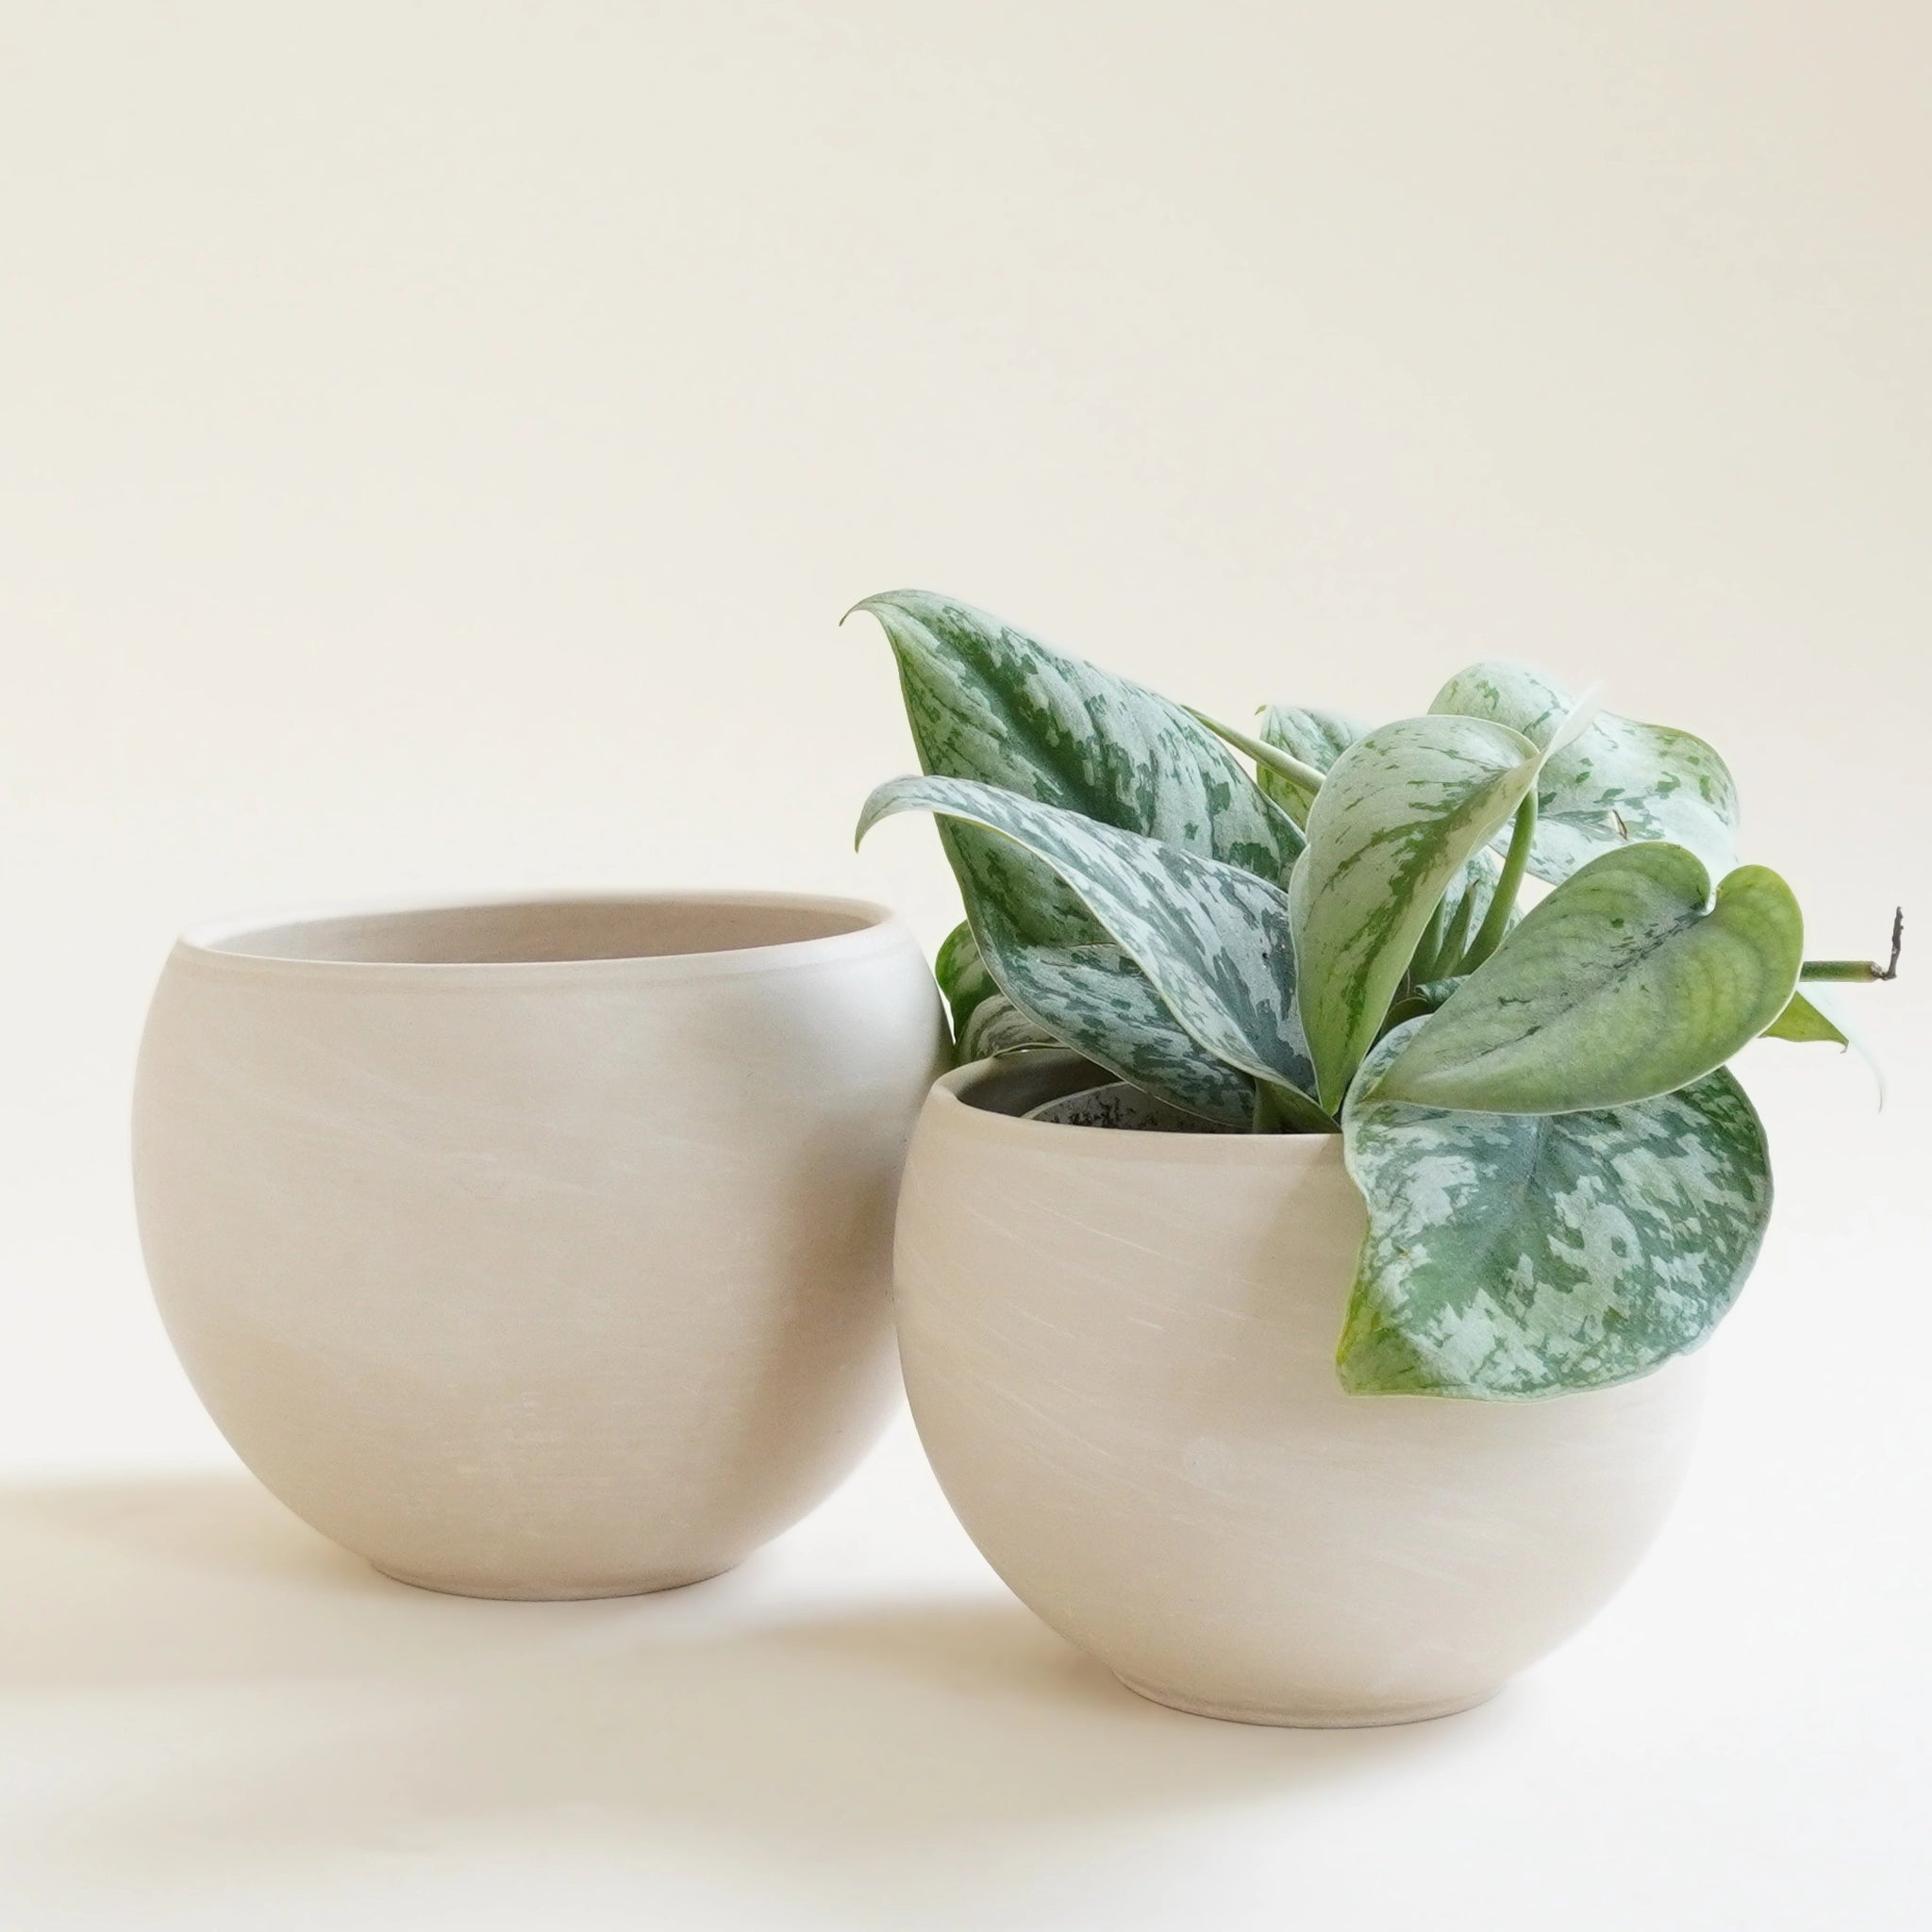 Two round tall bowl shaped beige colored pots, one is slightly larger than the other, and one is holding a small leafy house plant with dark and light green speckled leaves.